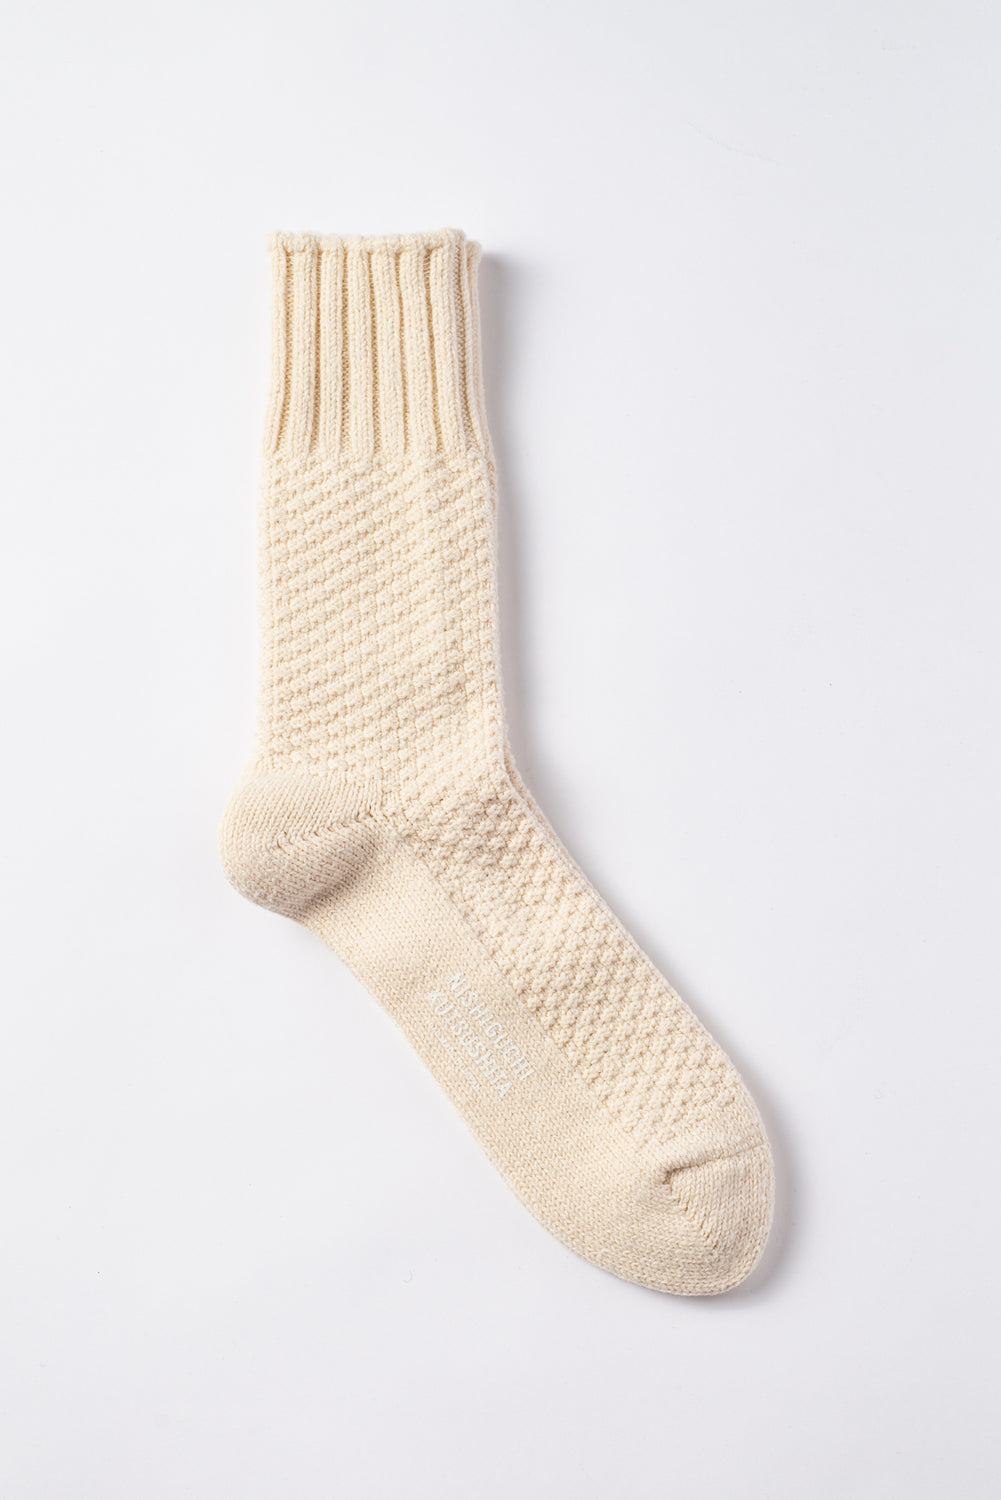 Wool and Cotton Boot Socks, Ivory (Size Small Only)